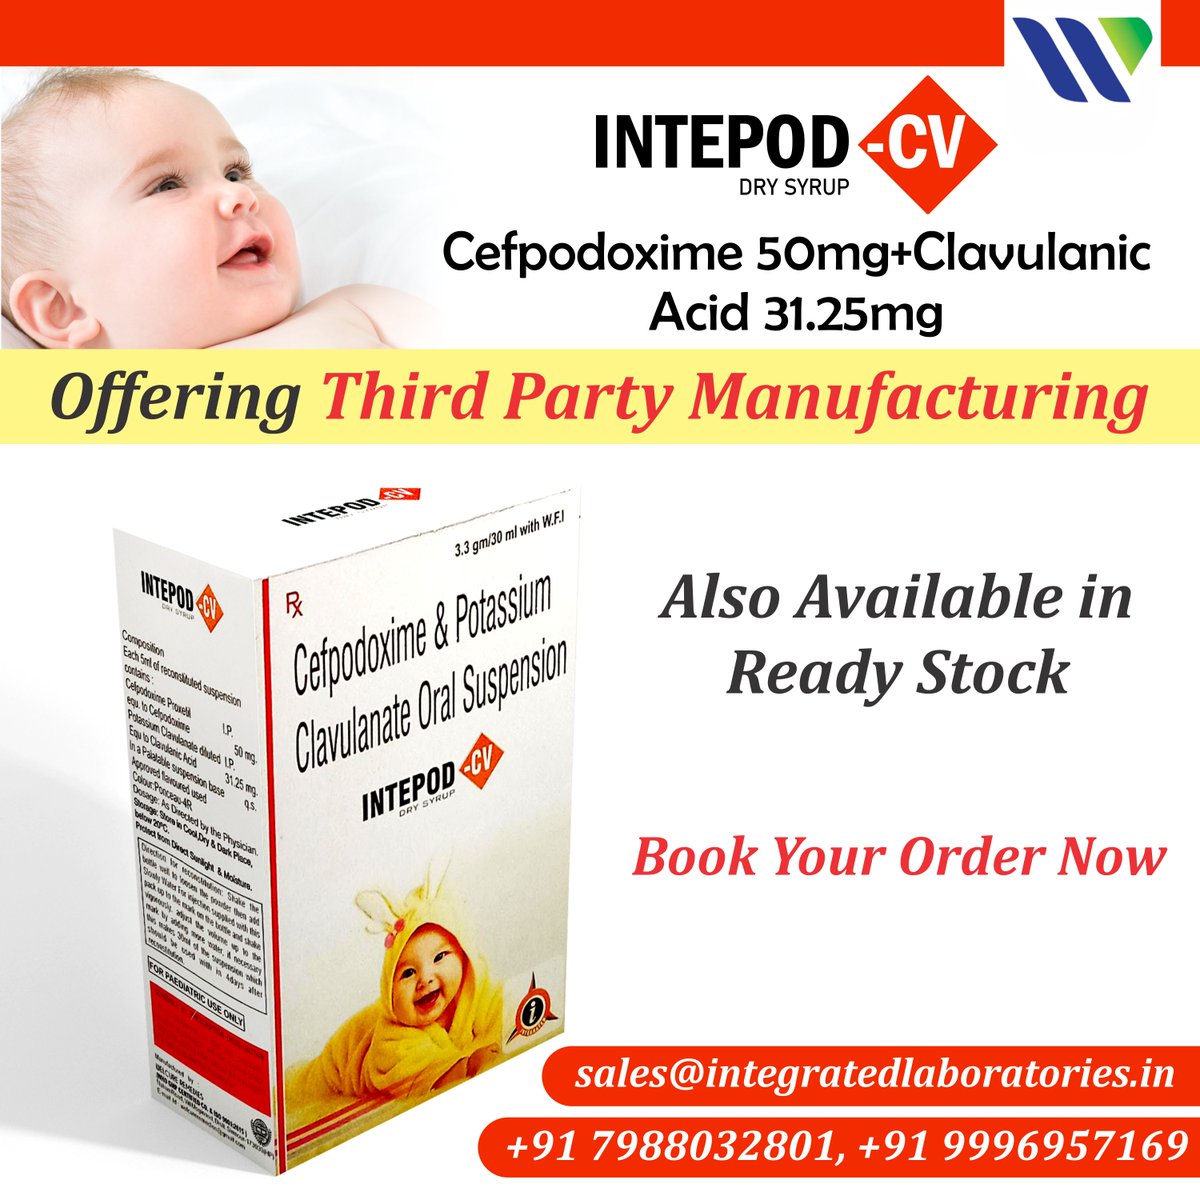 Cefpodoxime Clavulanate (Intepod-CV)= integratedlaboratories.in/product/cefpod… 🎉RAISE YOUR ORDER NOW We are WHO GMP-certified #manufacturers. Contact us for Business Opportunities. #thirdpartymanufacturiing #pharmafranchise #IntegratedLaboratories #IntepodCV #Antibiotics #Healthcare #Medicine